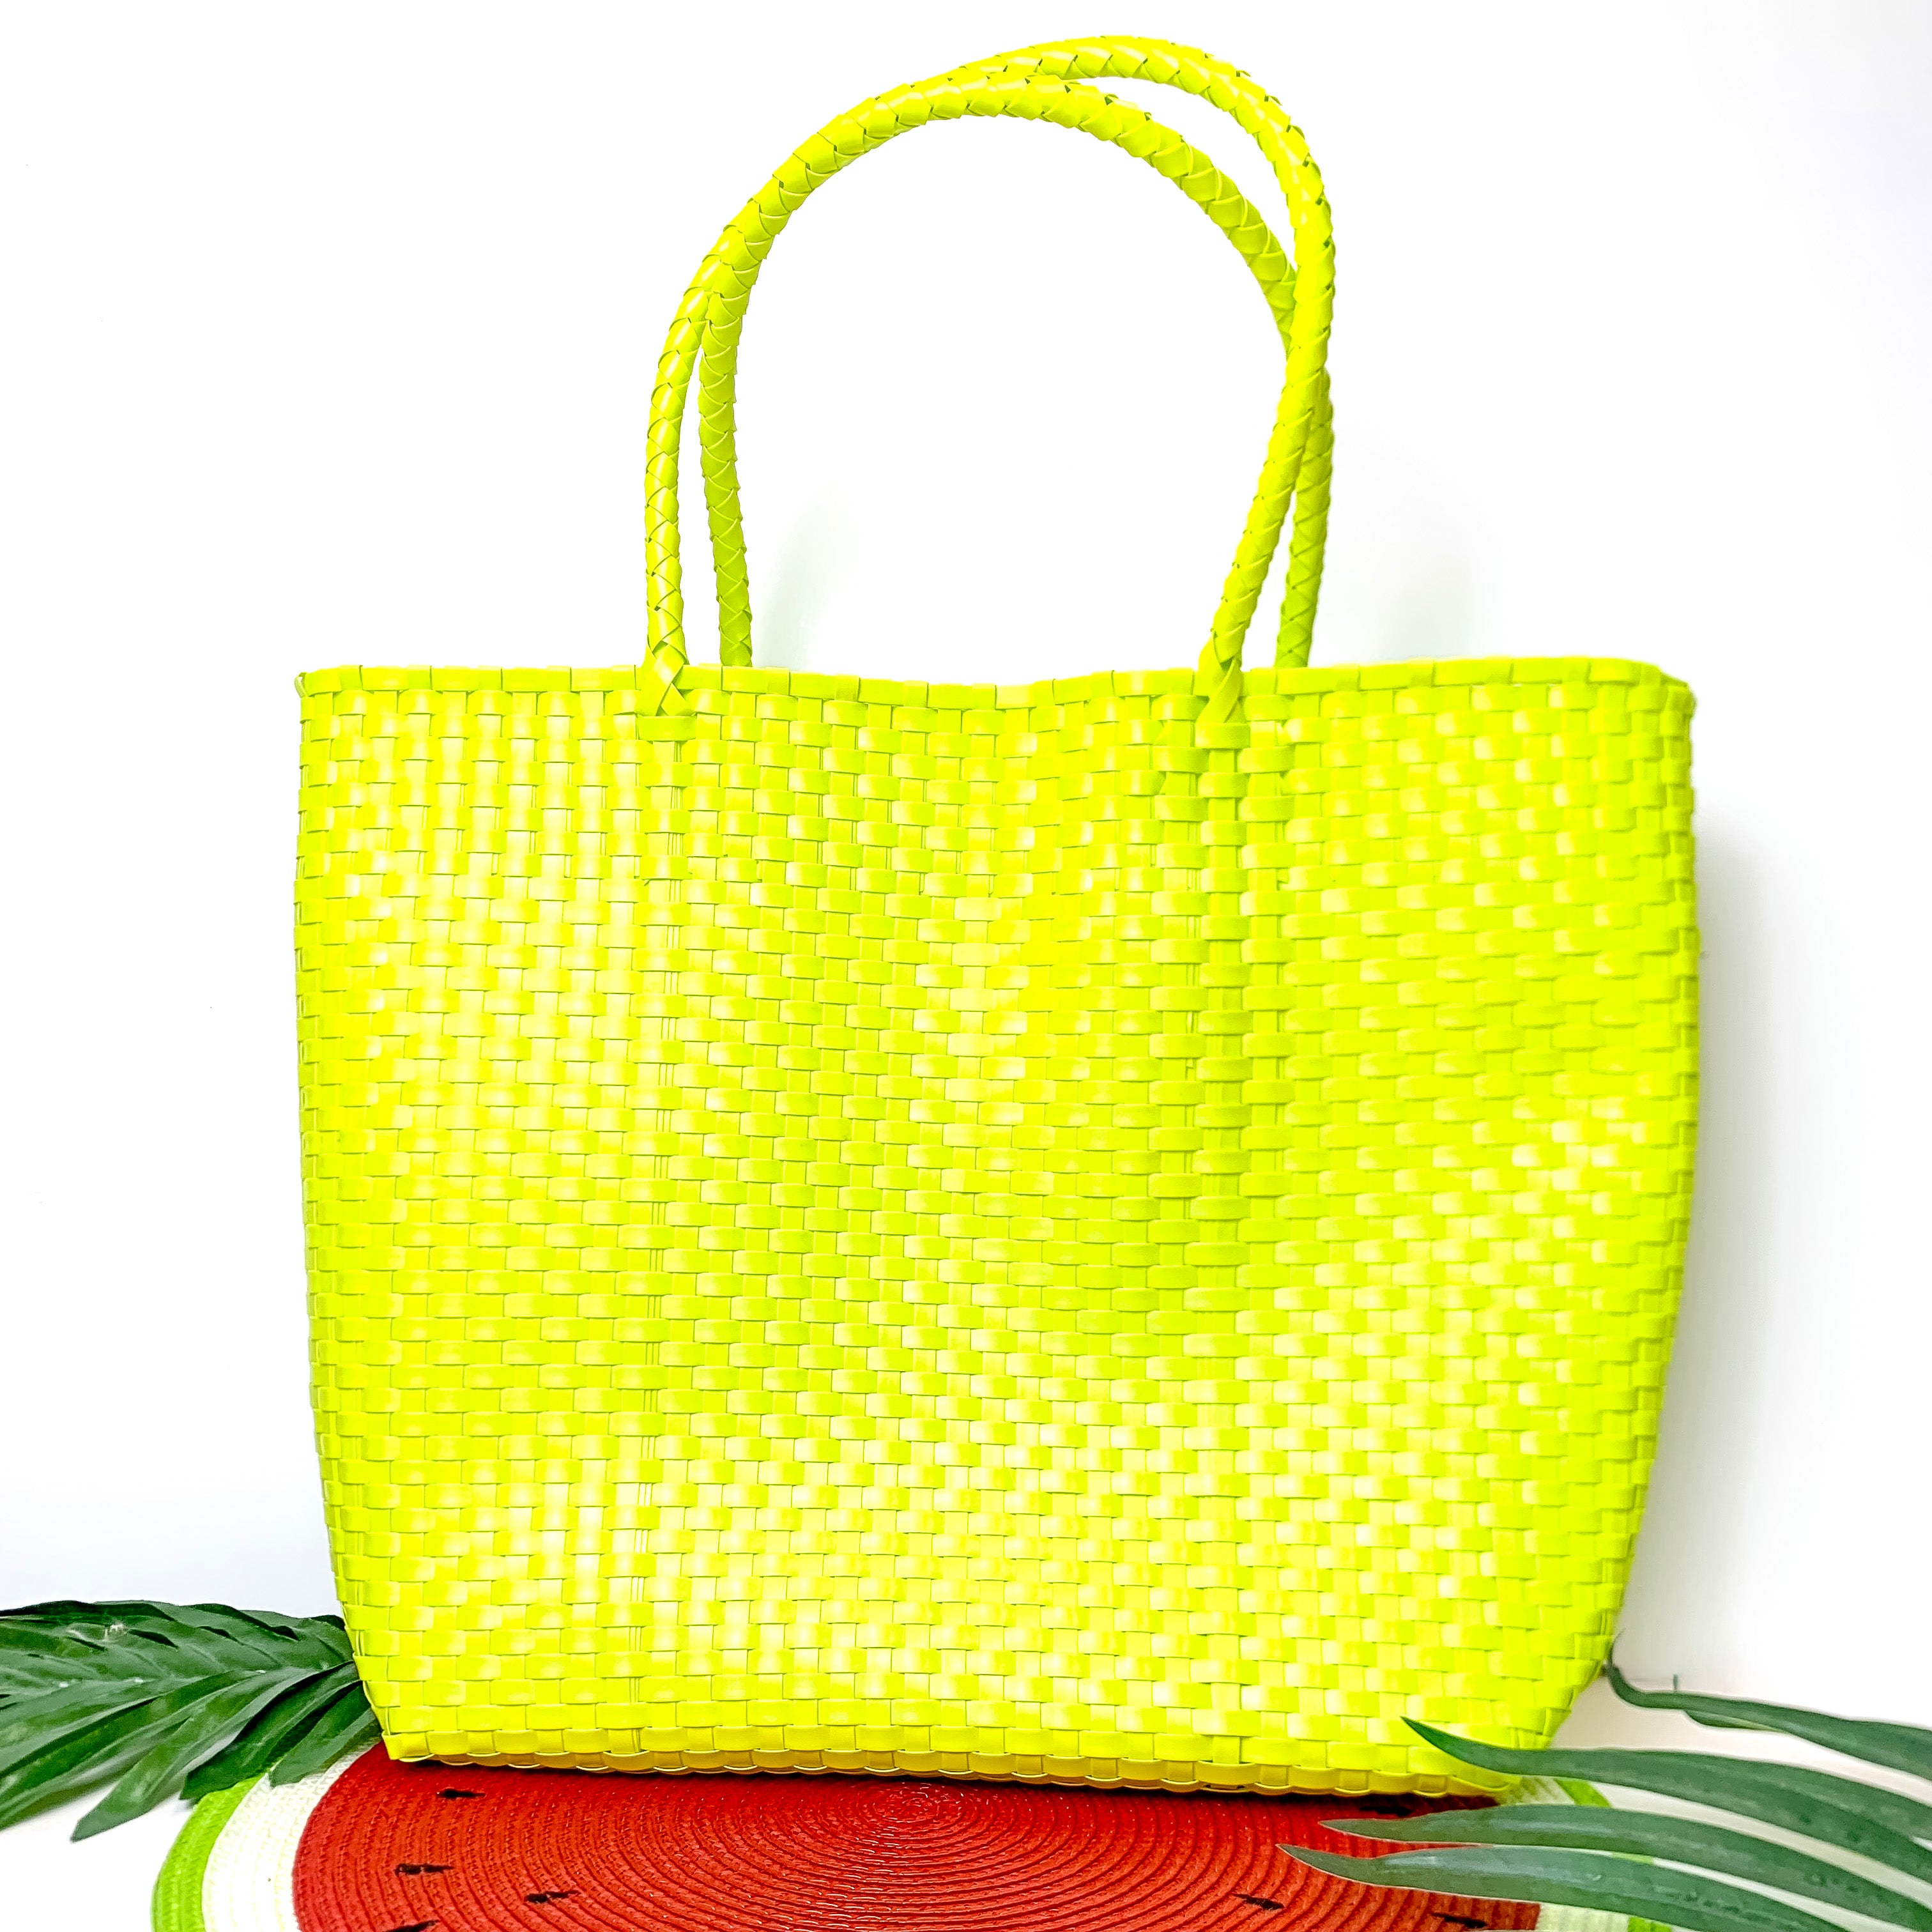 Coastal Couture Carryall Tote Bag in Neon Yellow